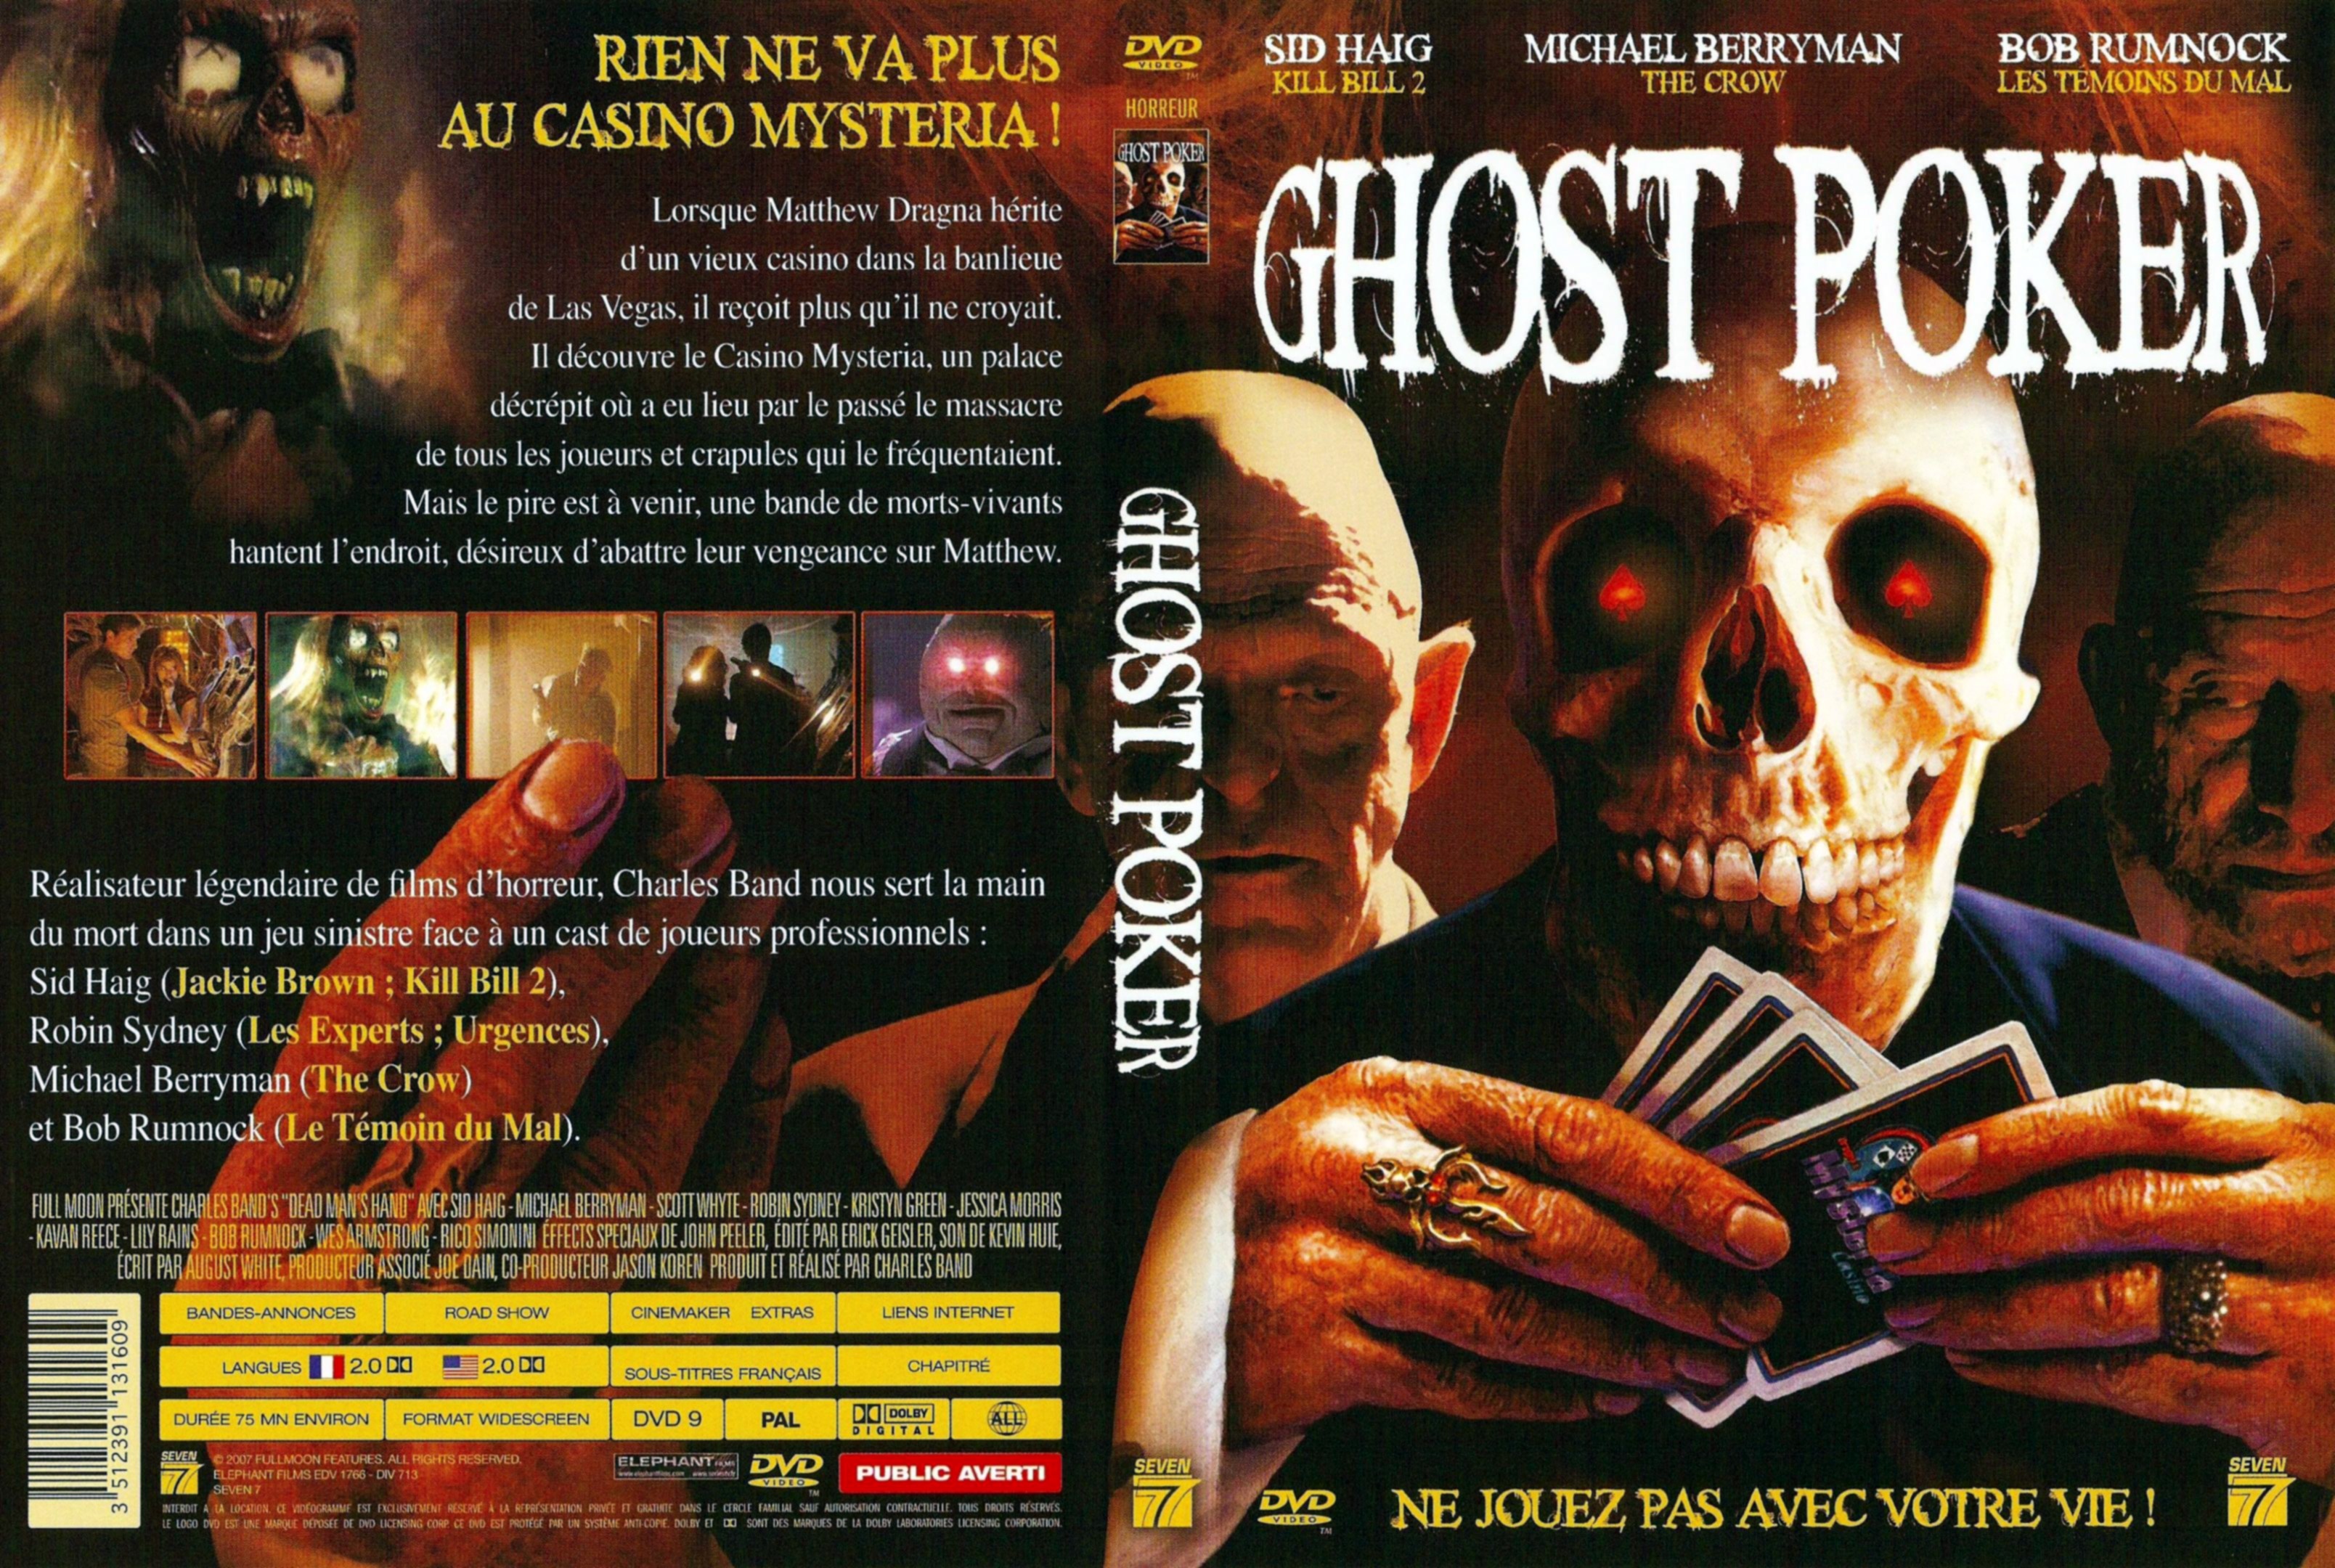 Jaquette DVD Ghost poker